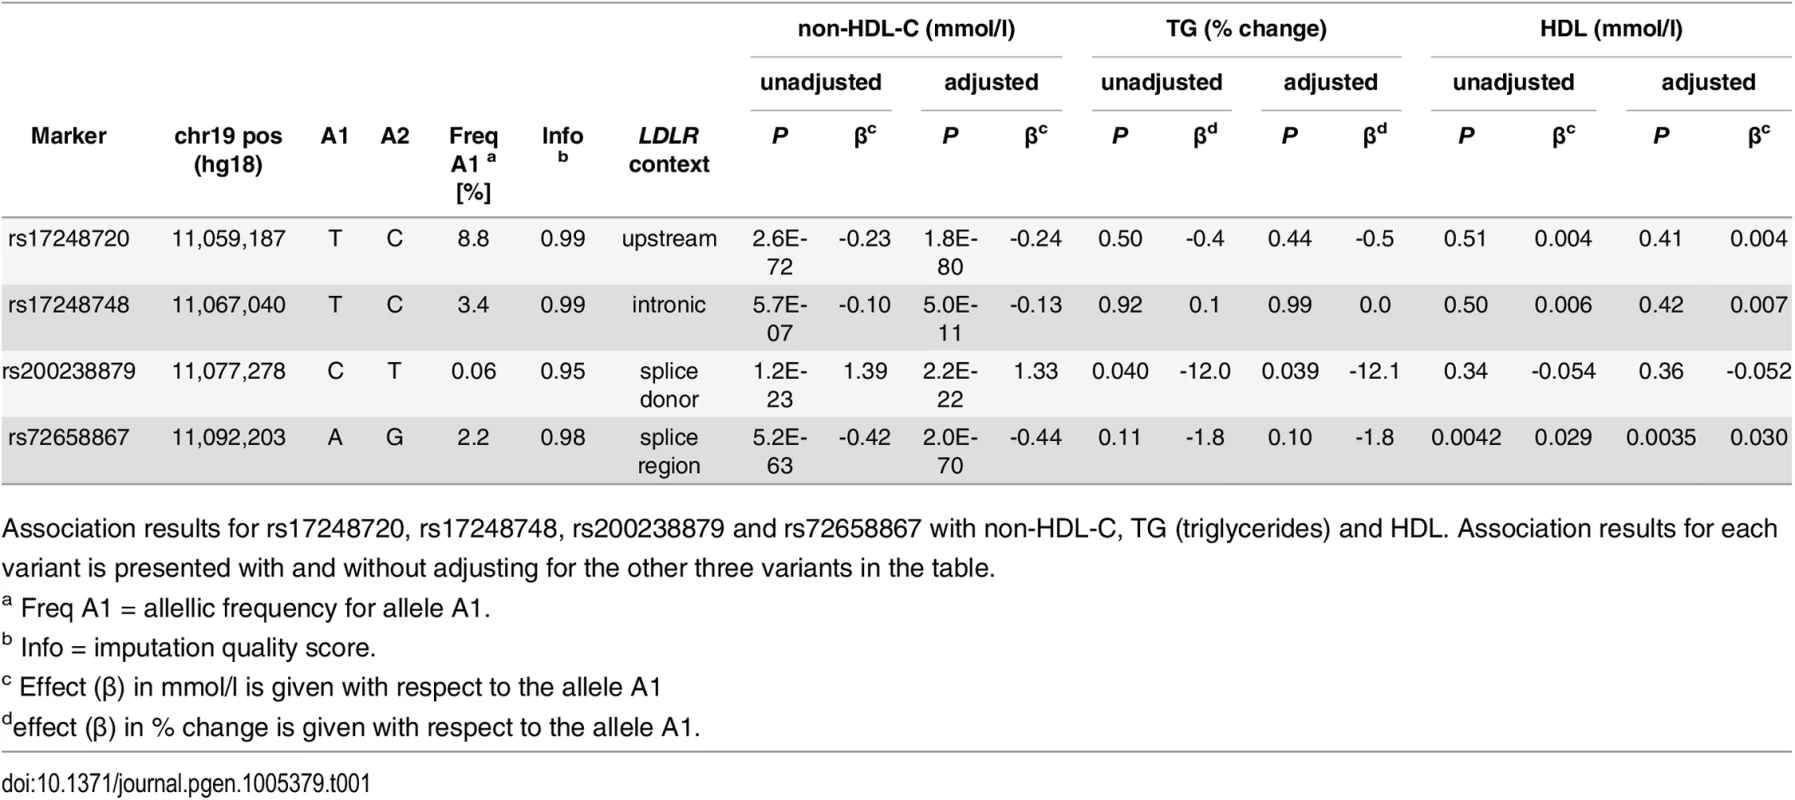 Association of <i>LDLR</i> sequence variants with non-HDL-C, TG and HDL-C in Iceland.